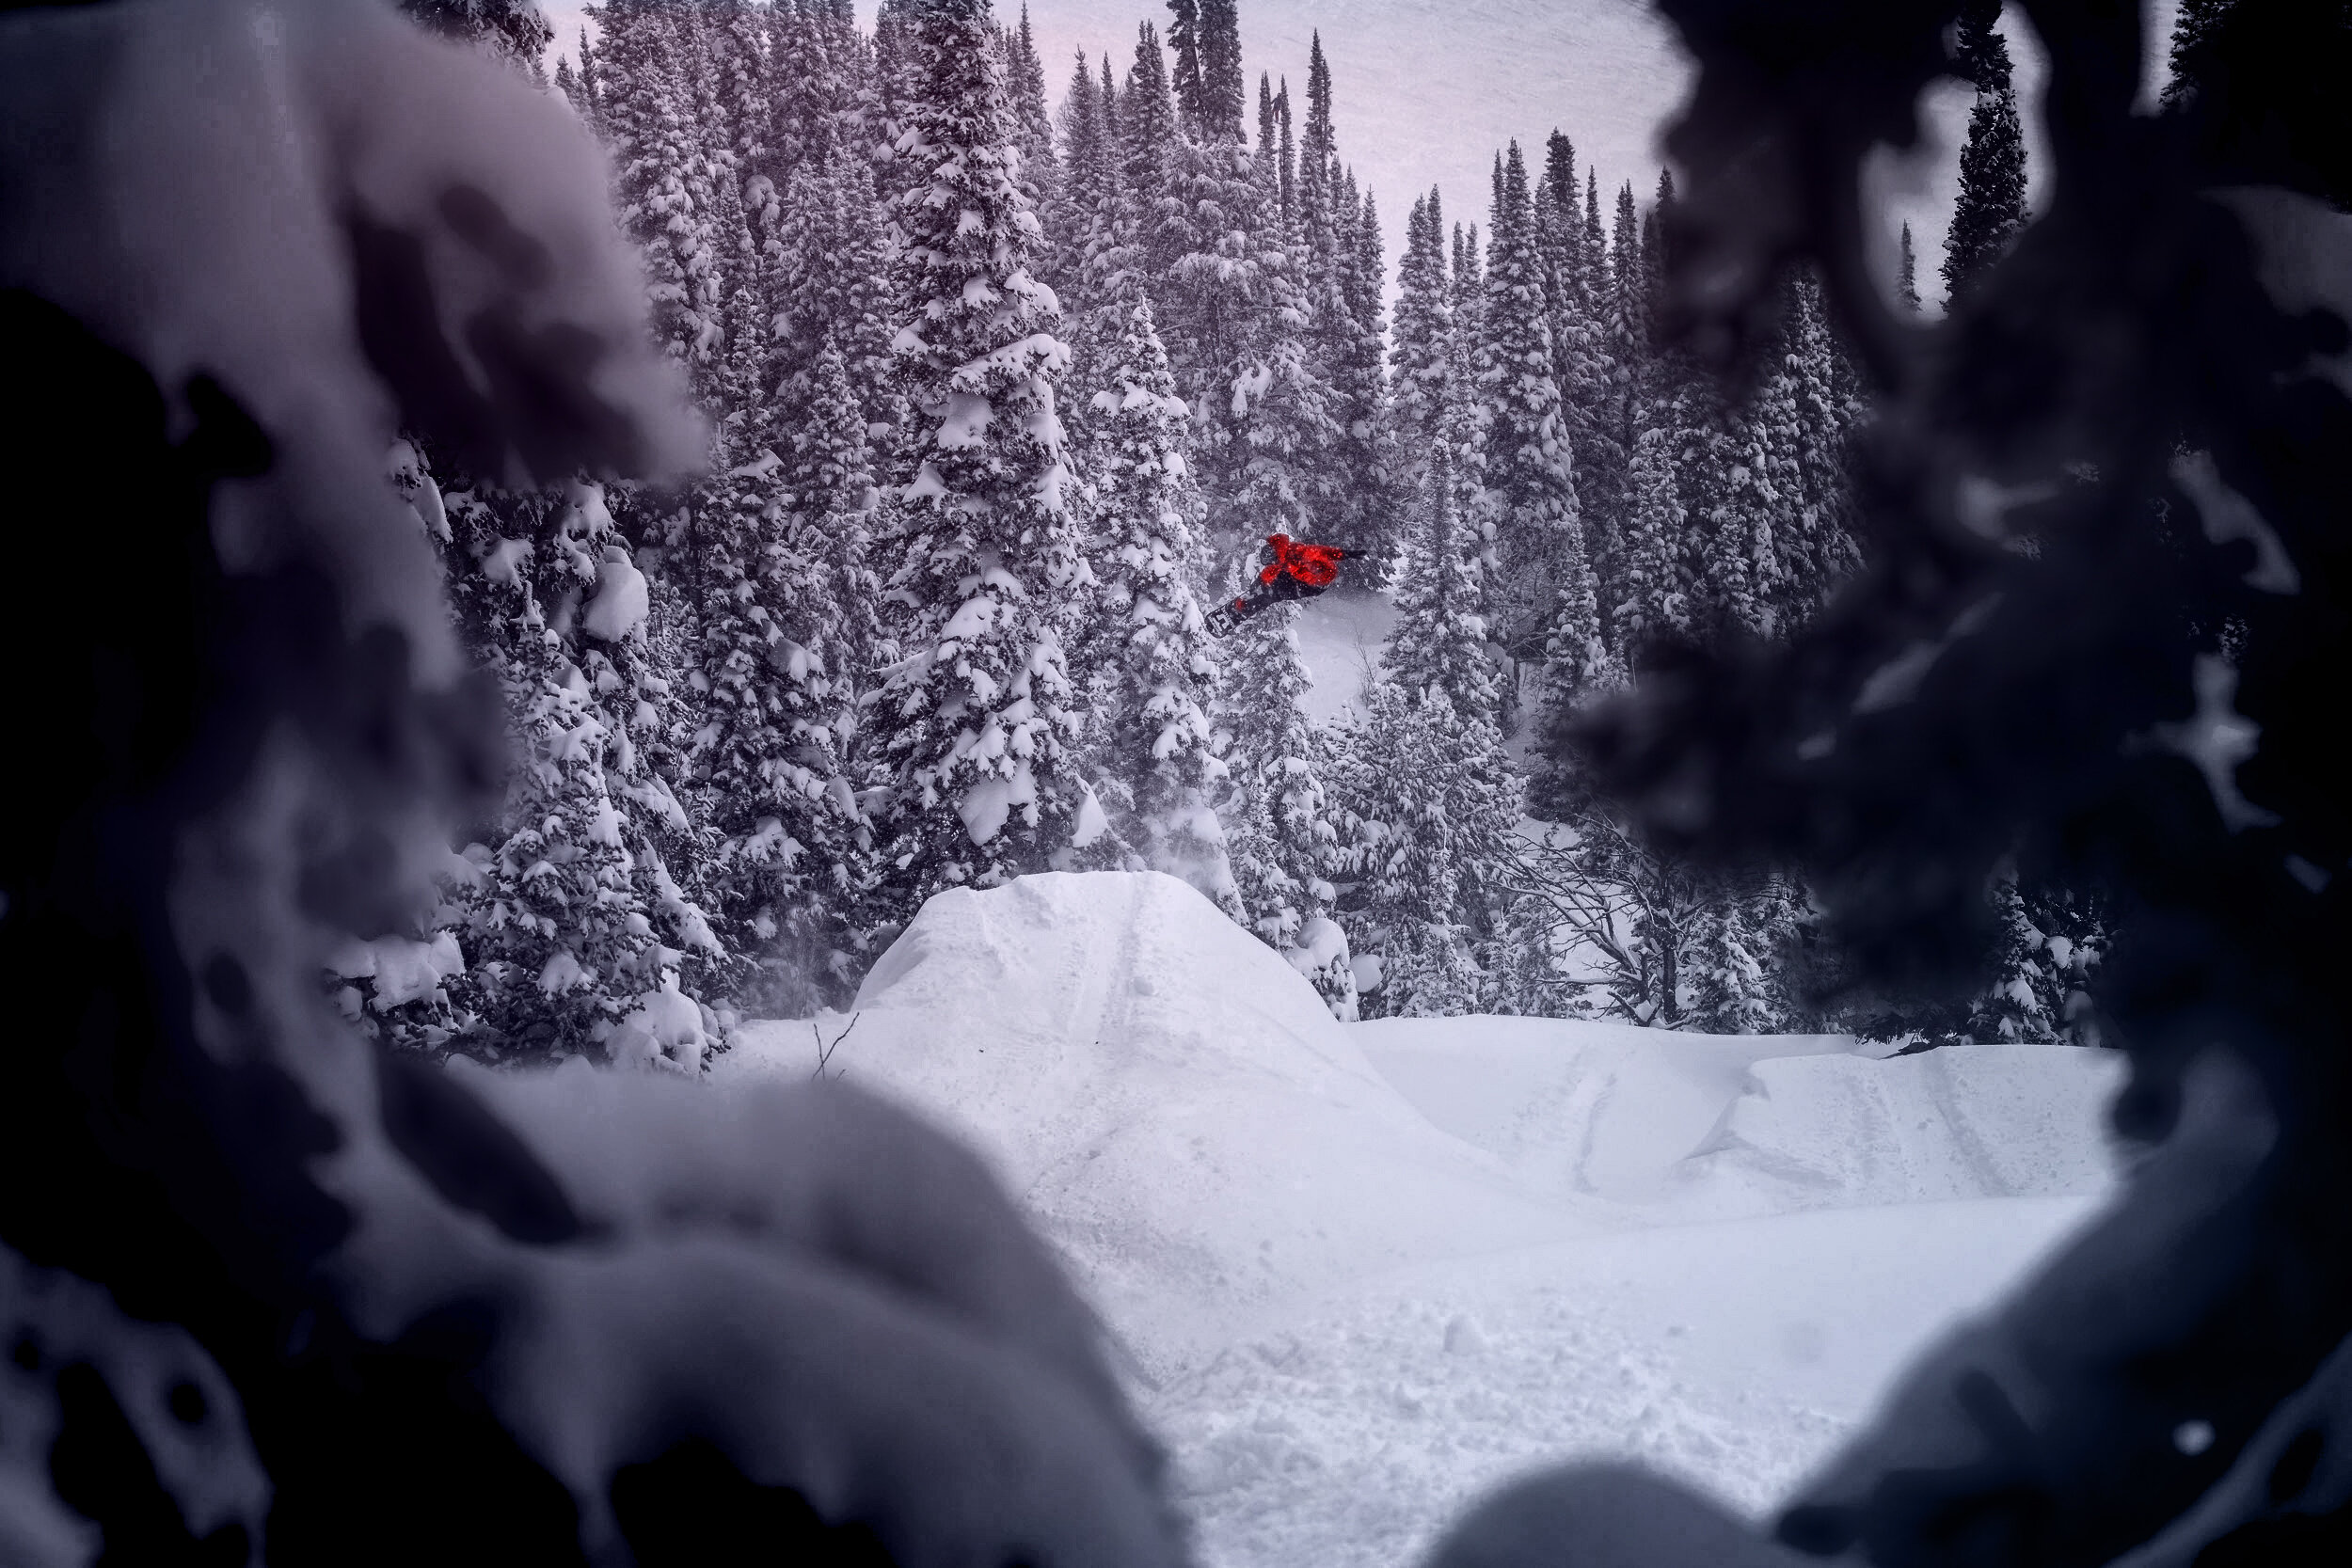 Snowboarder in red airborne after making jump surrounded by snow covered pine trees